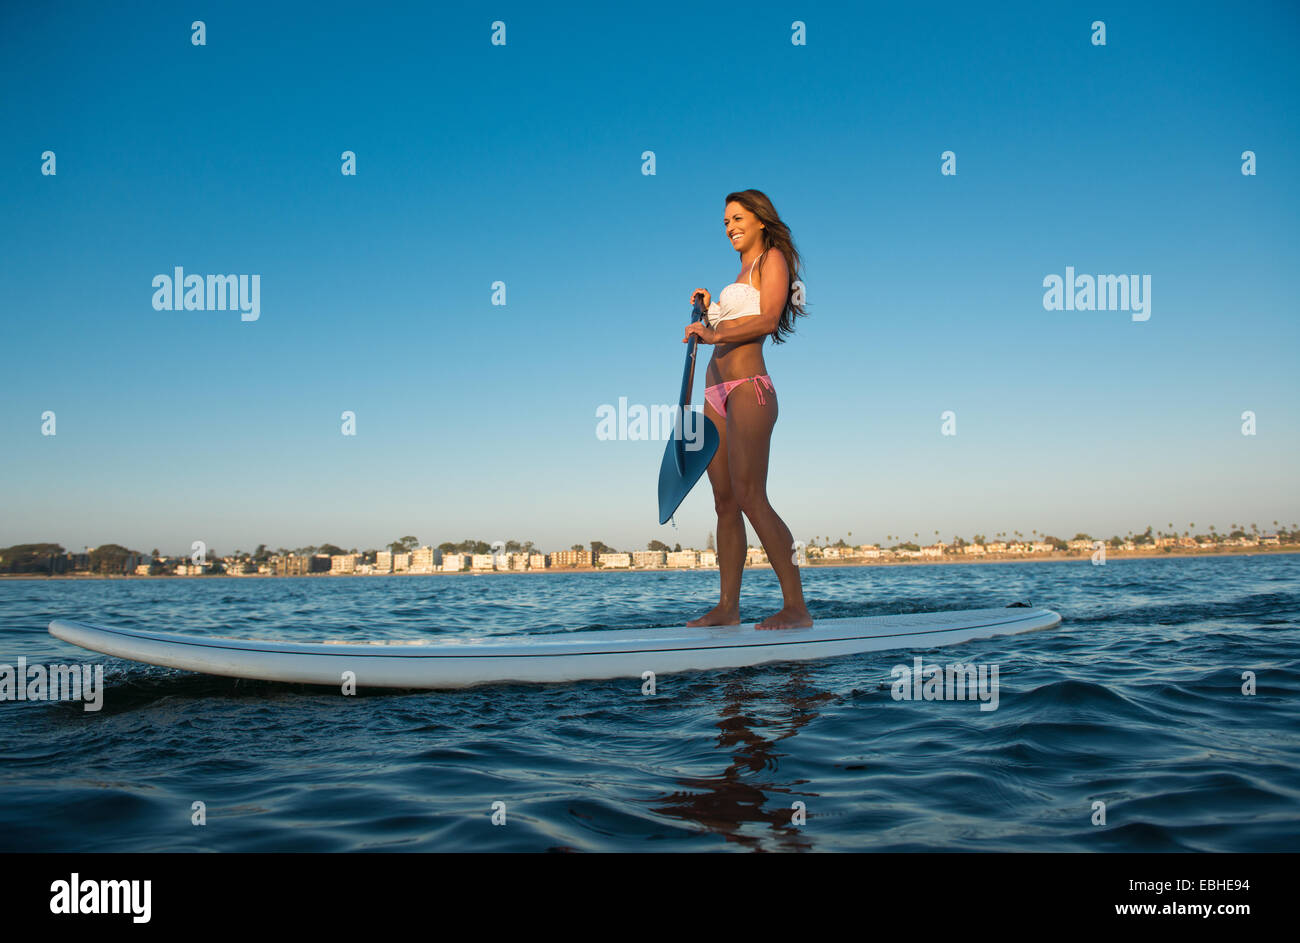 Young woman stand up paddleboarding, Mission Bay, San Diego, California, USA Stock Photo